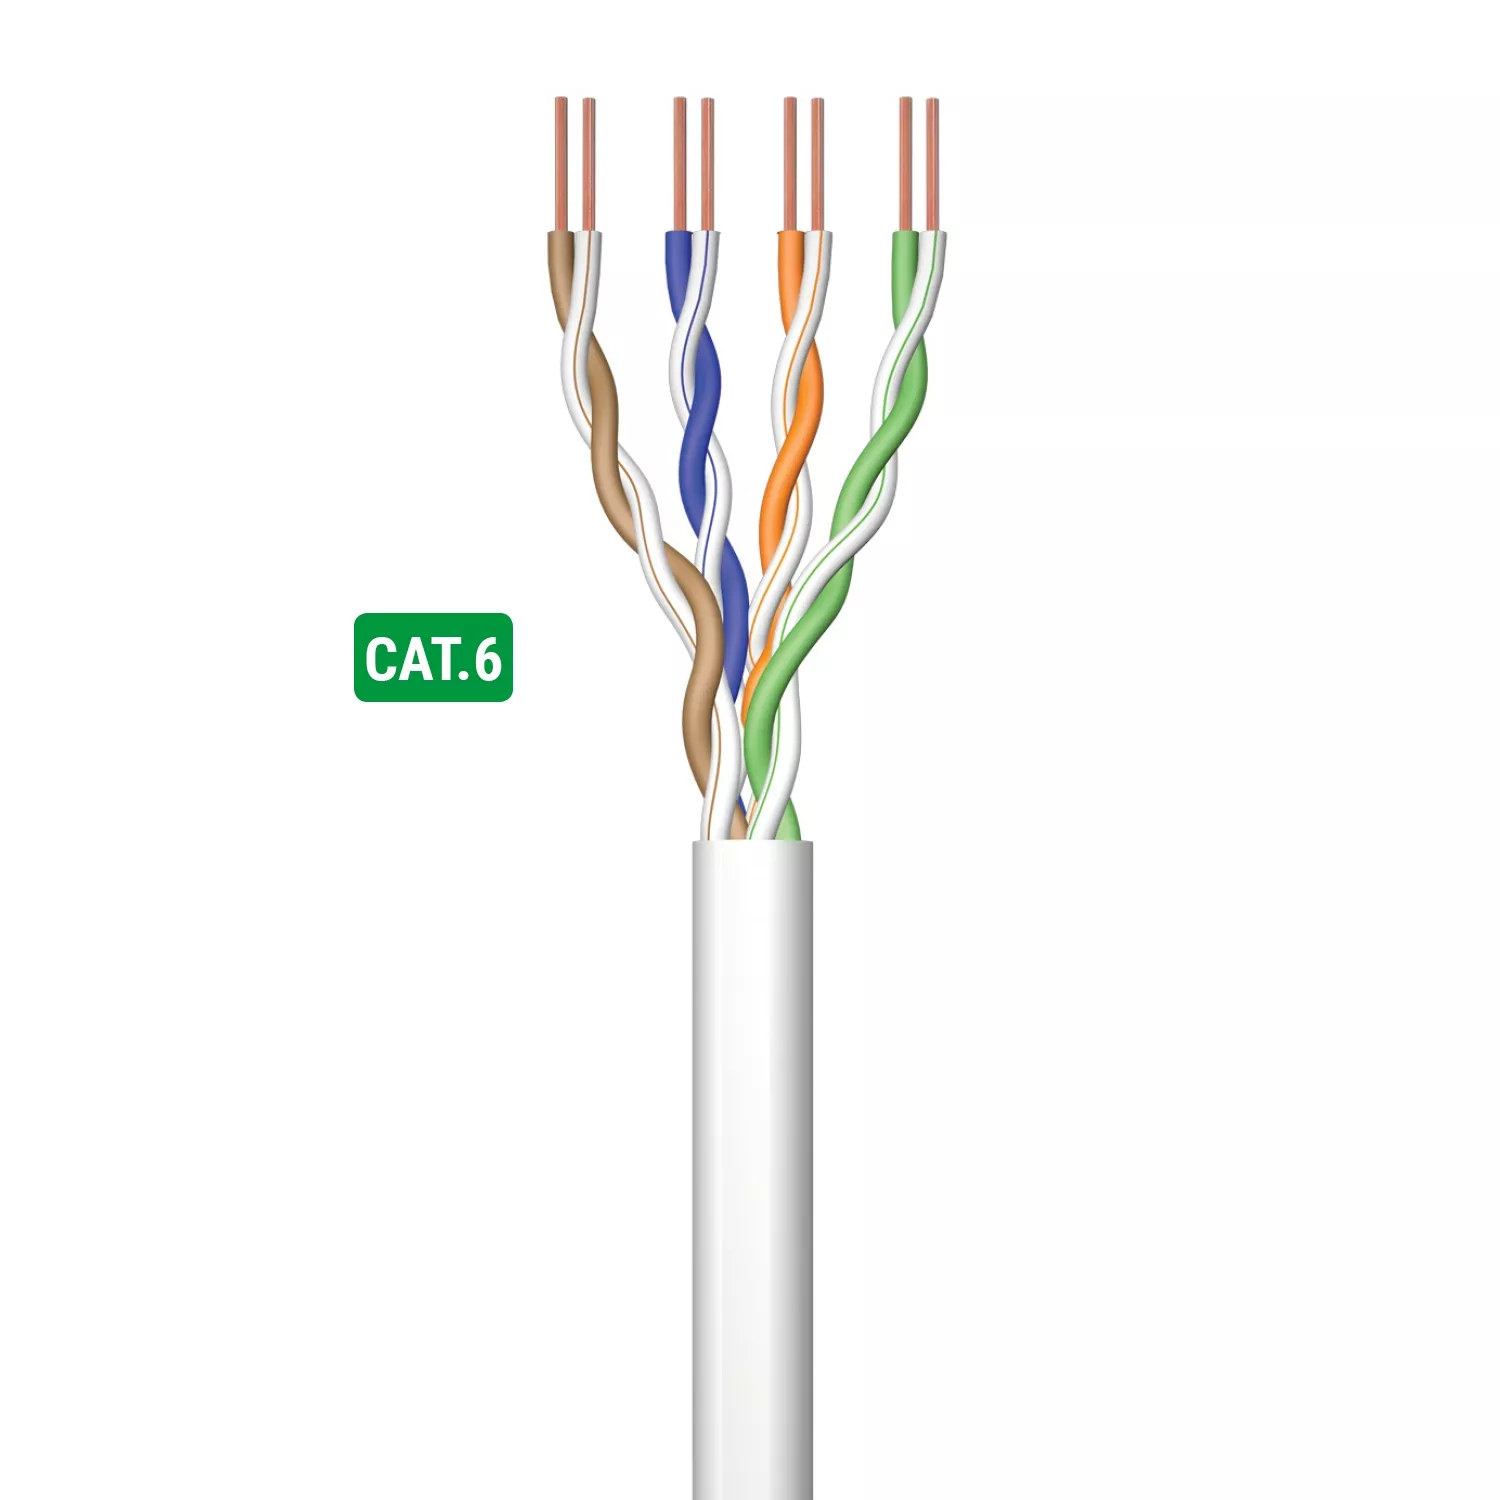 https://www.xgamertechnologies.com/images/products/Cat 6 Solid Cable for Network.webp